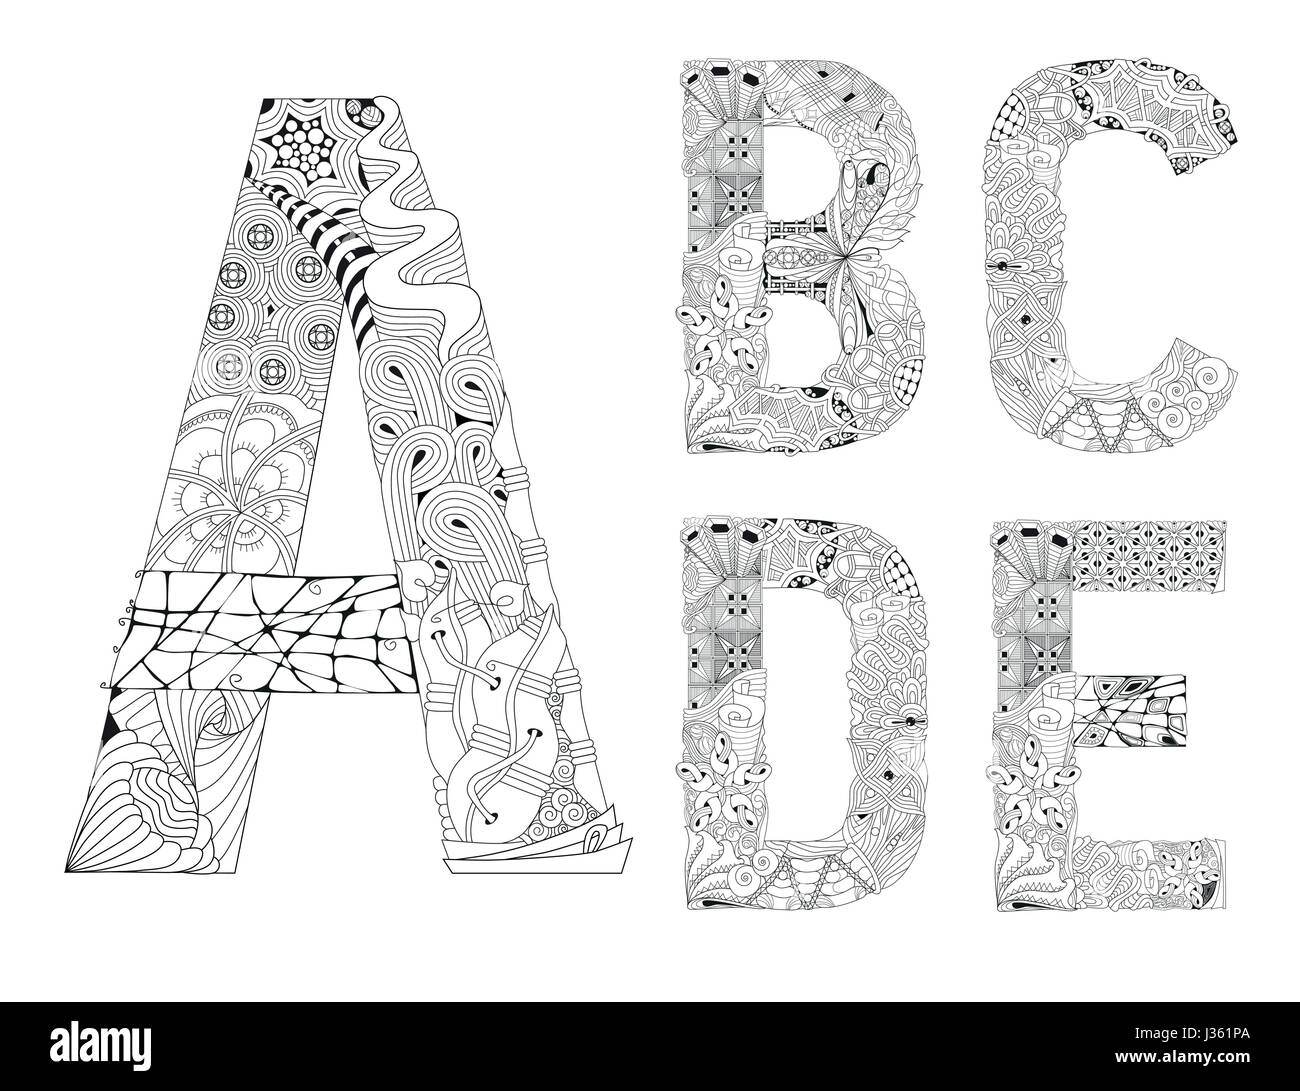 Unusual alphabet doodle style letters on a white background Stock Vector